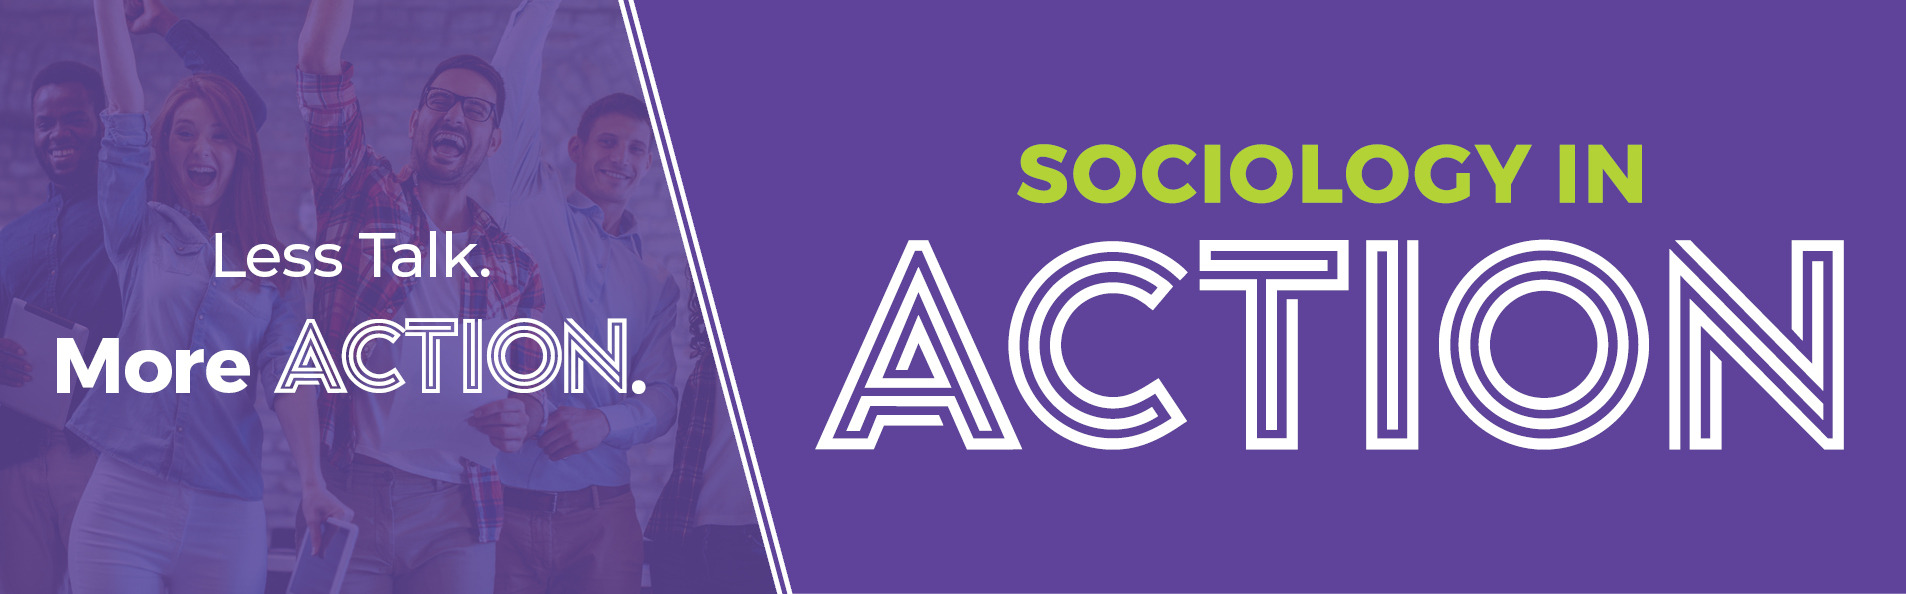 Sociology in Action banner